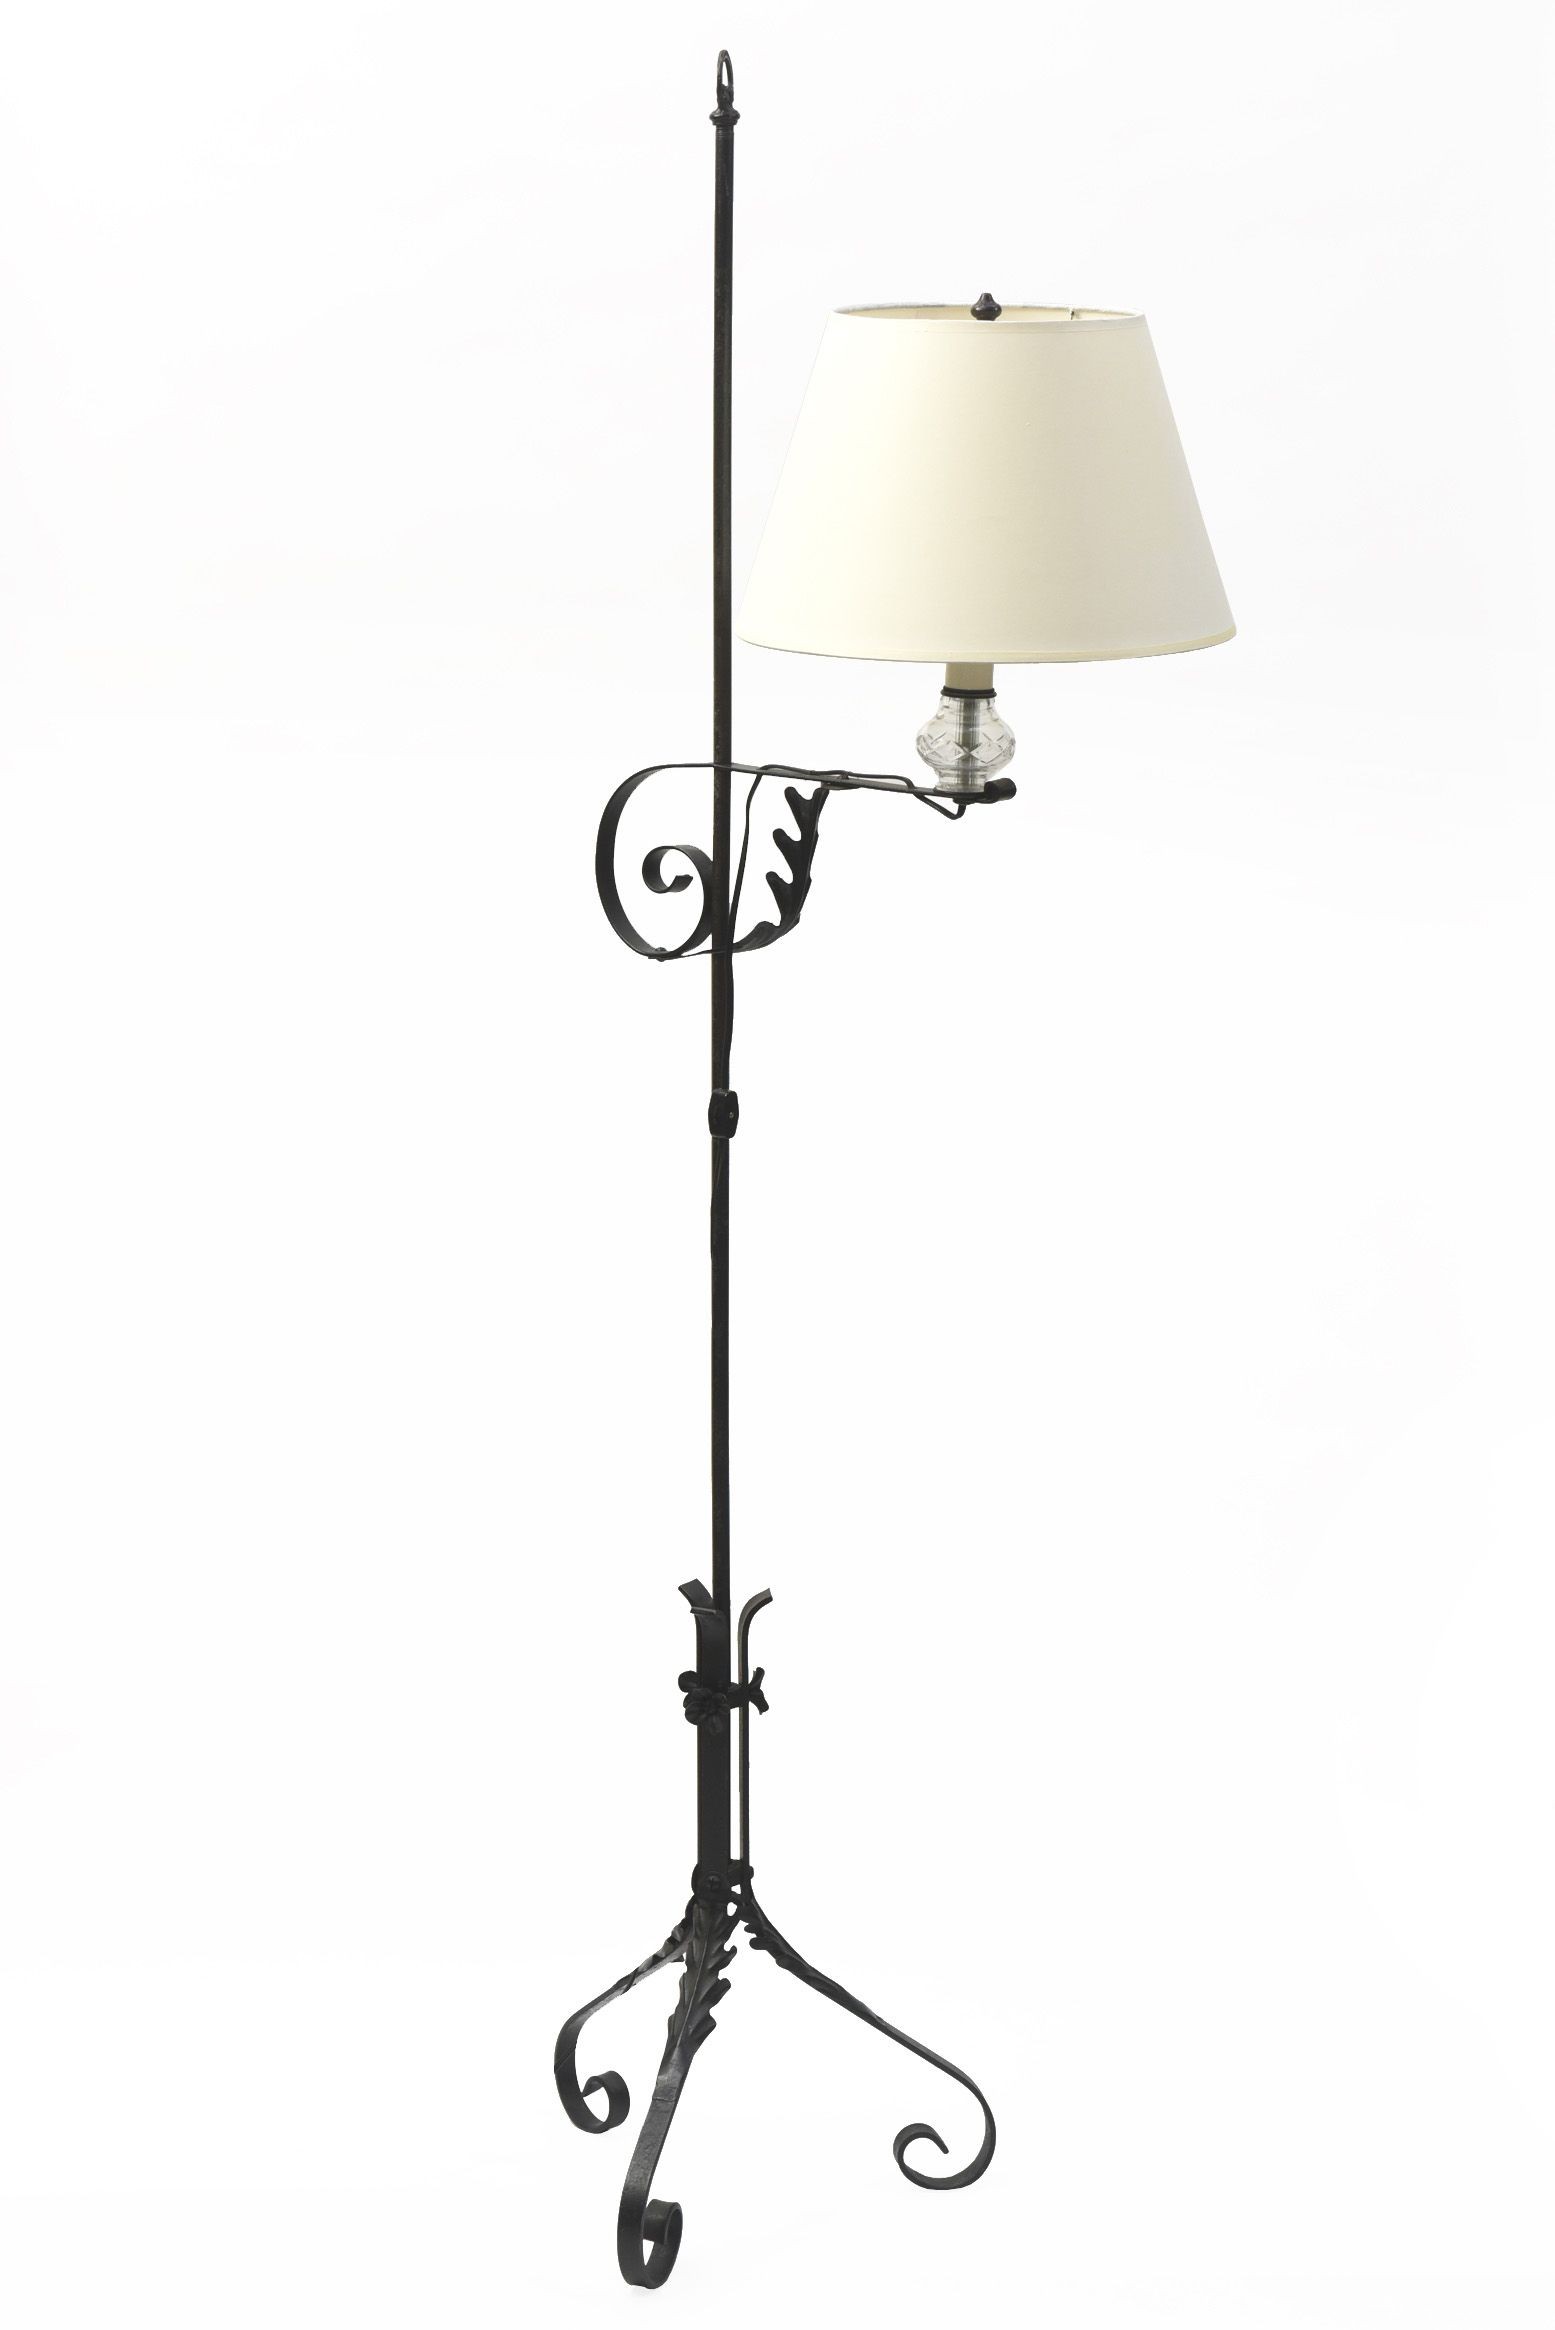 Colonial floor lamps o cabinet ideas